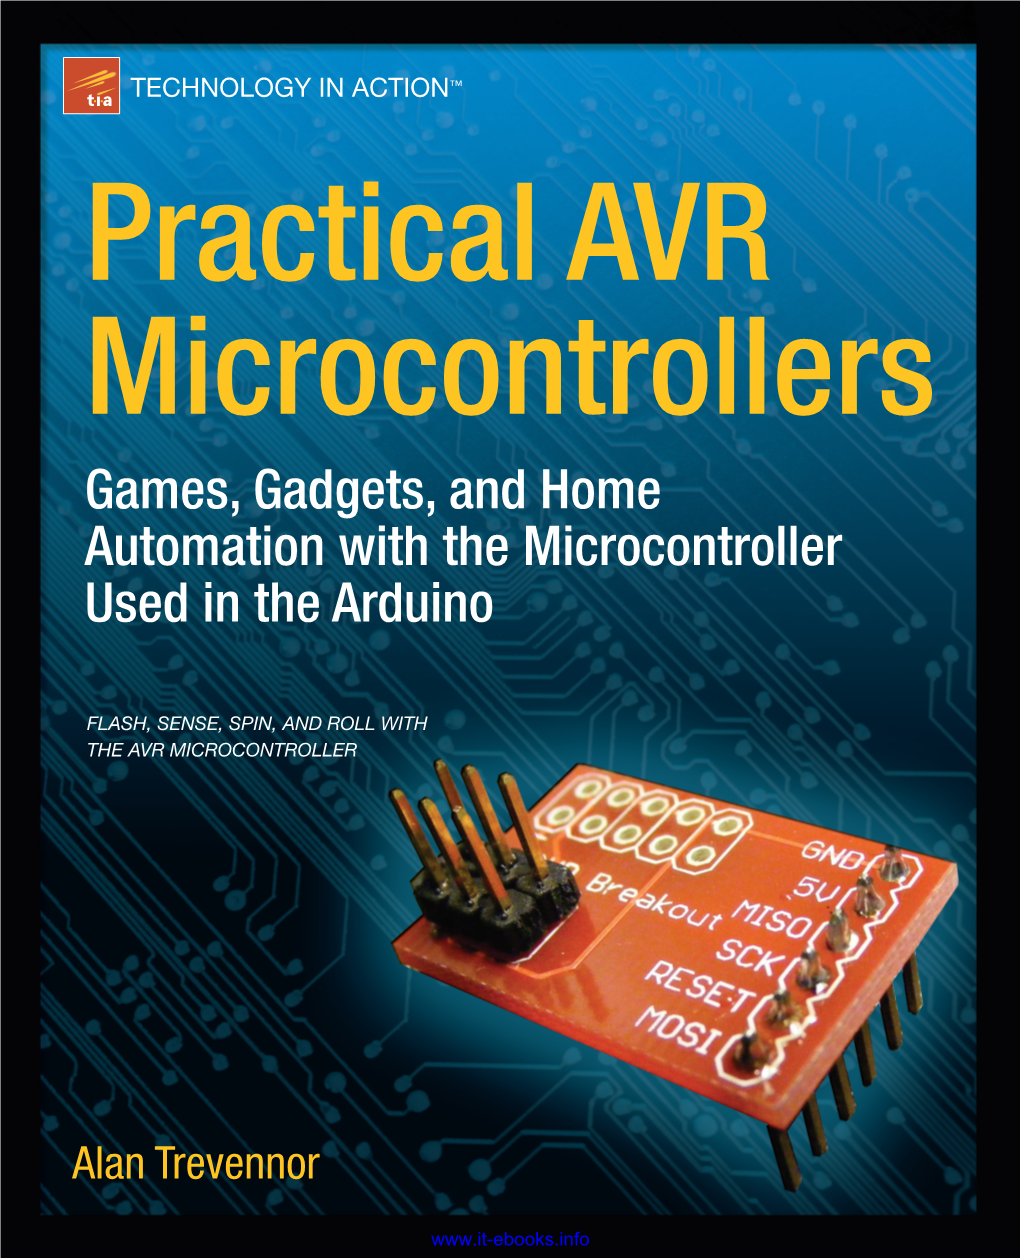 Practical AVR Microcontrollers Games, Gadgets, and Home Automation with the Microcontroller Used in the Arduino